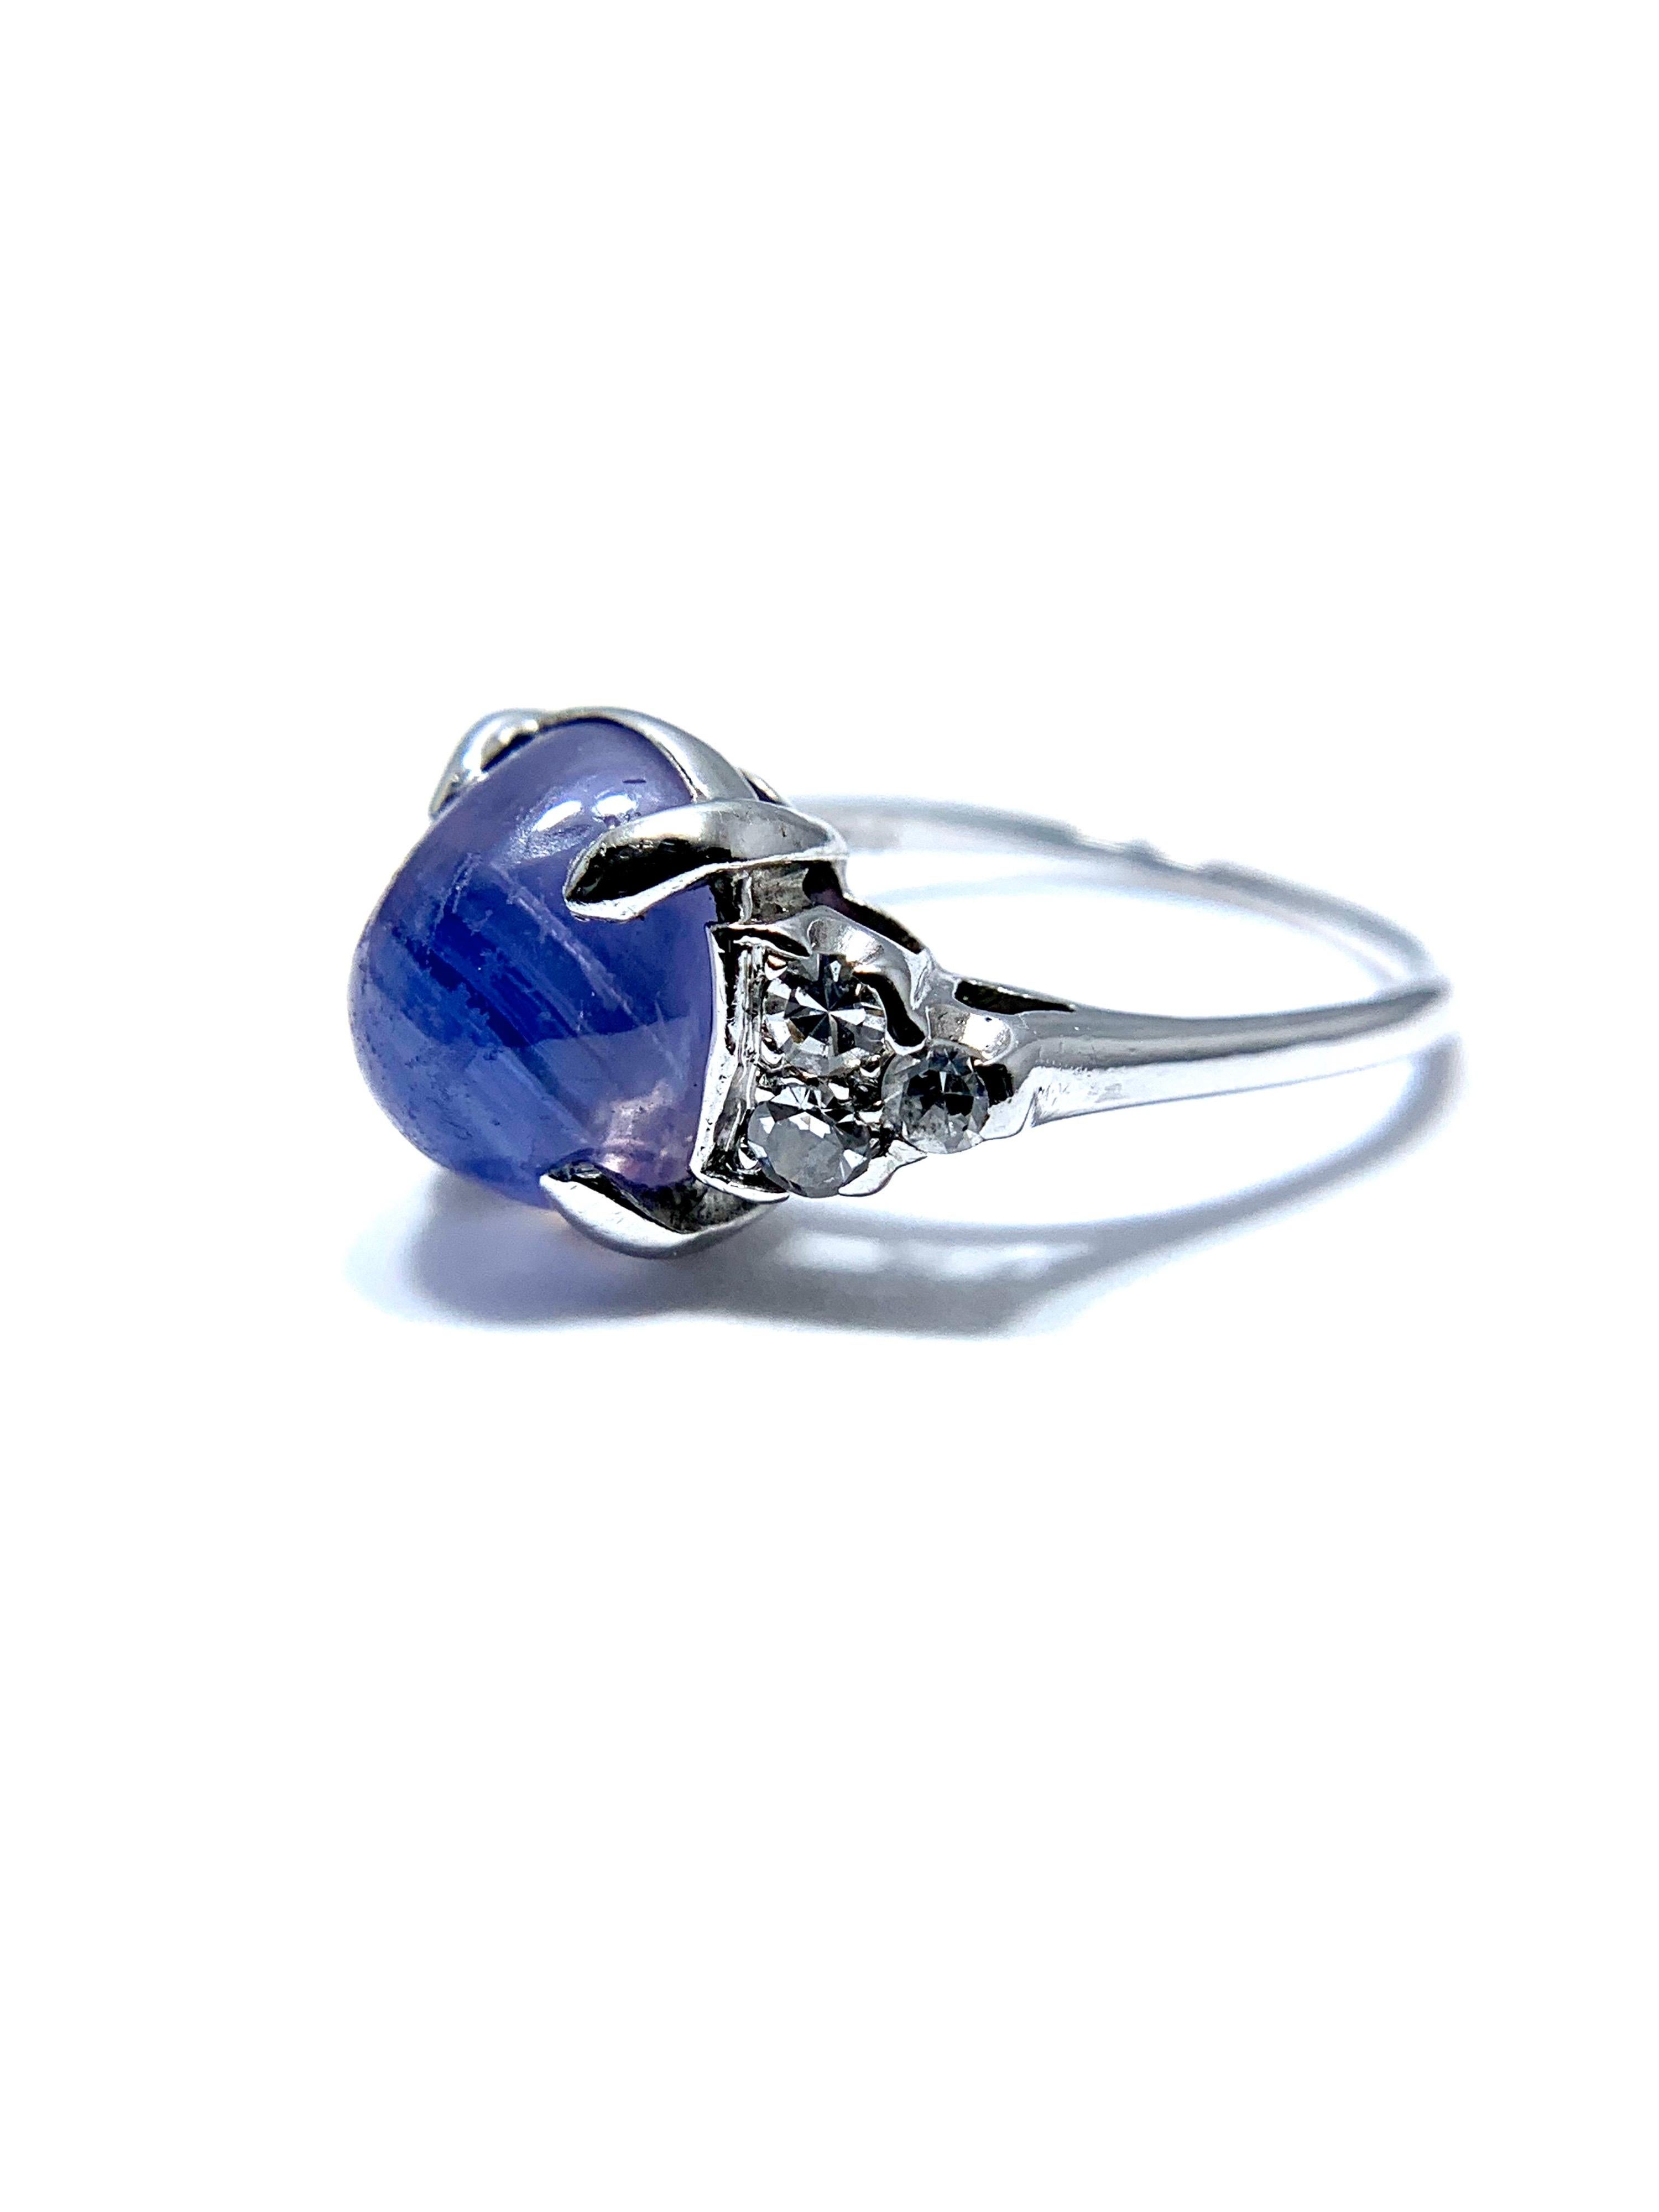 Oval Cut 5.36 Carat Lavander Cabochon Sapphire and Diamond Cocktail Ring